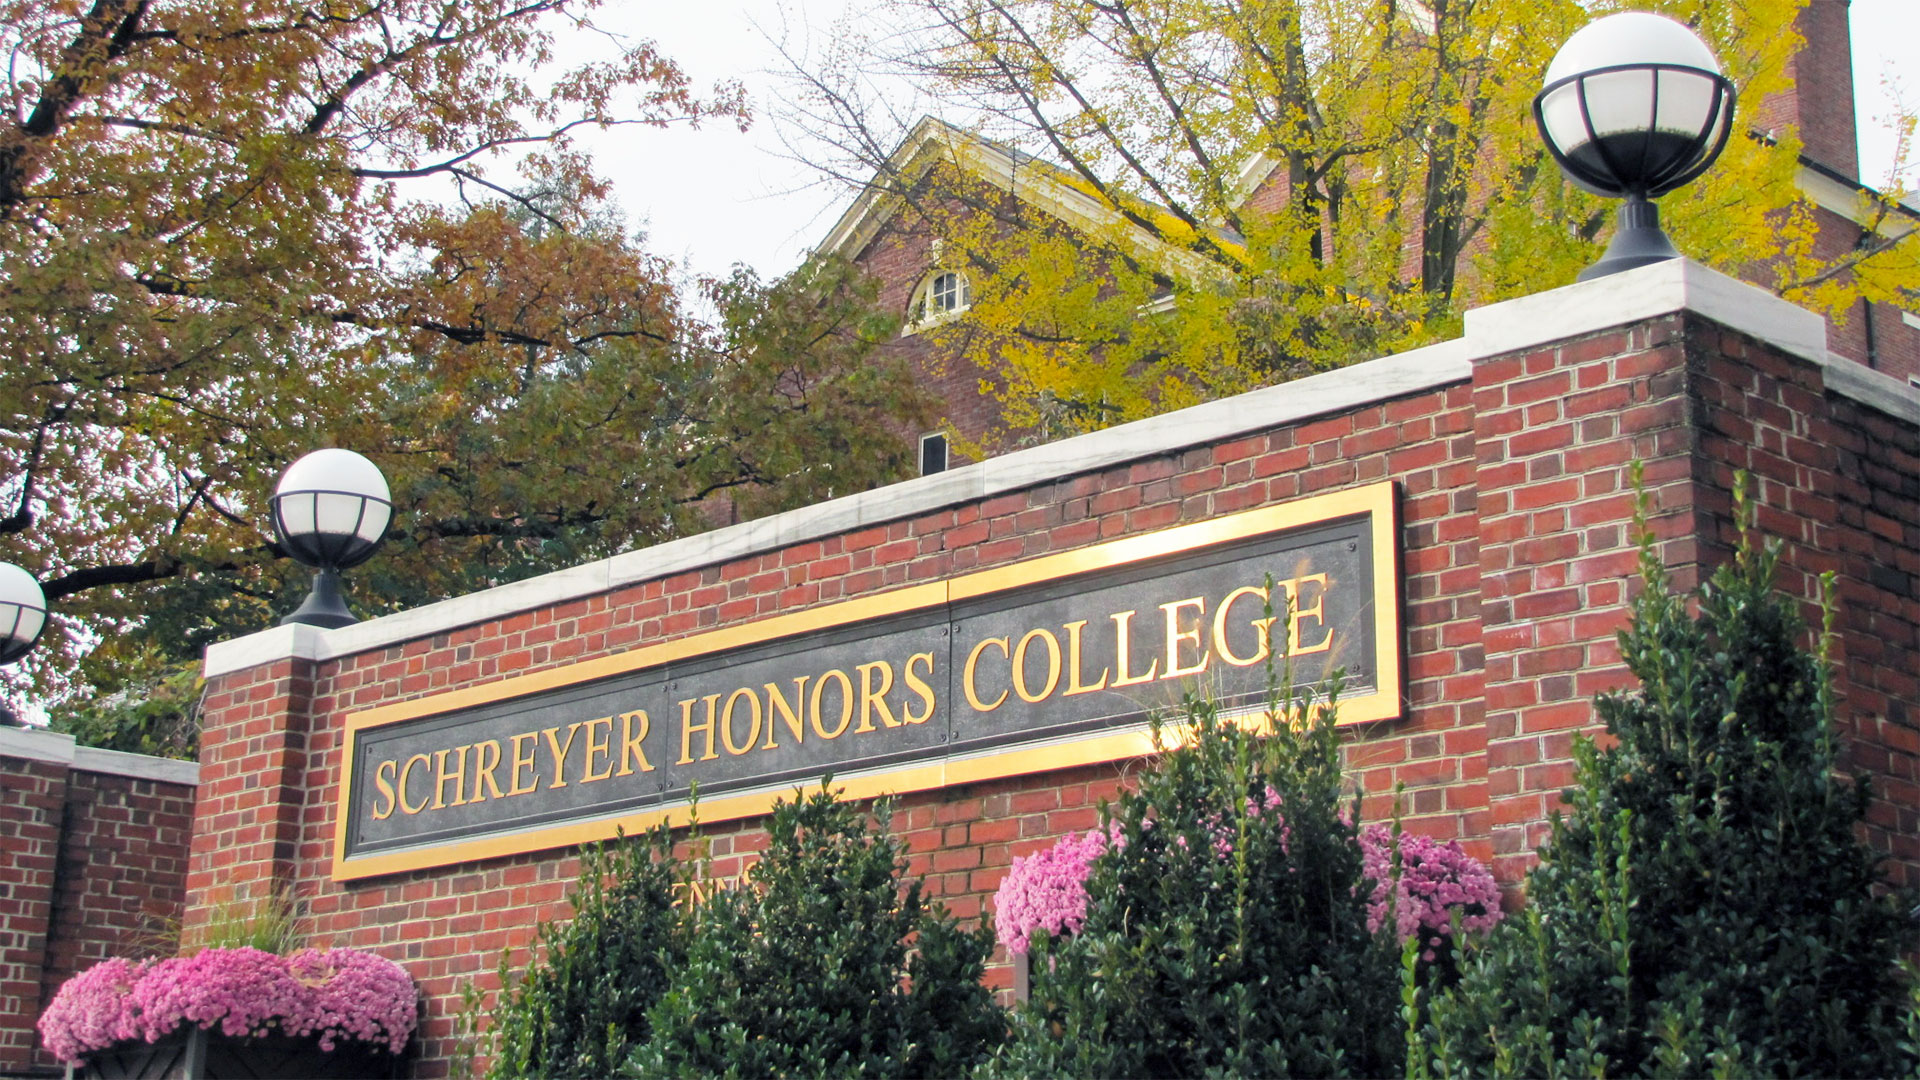 History & Traditions About Us Schreyer Honors College (SHC) at Penn